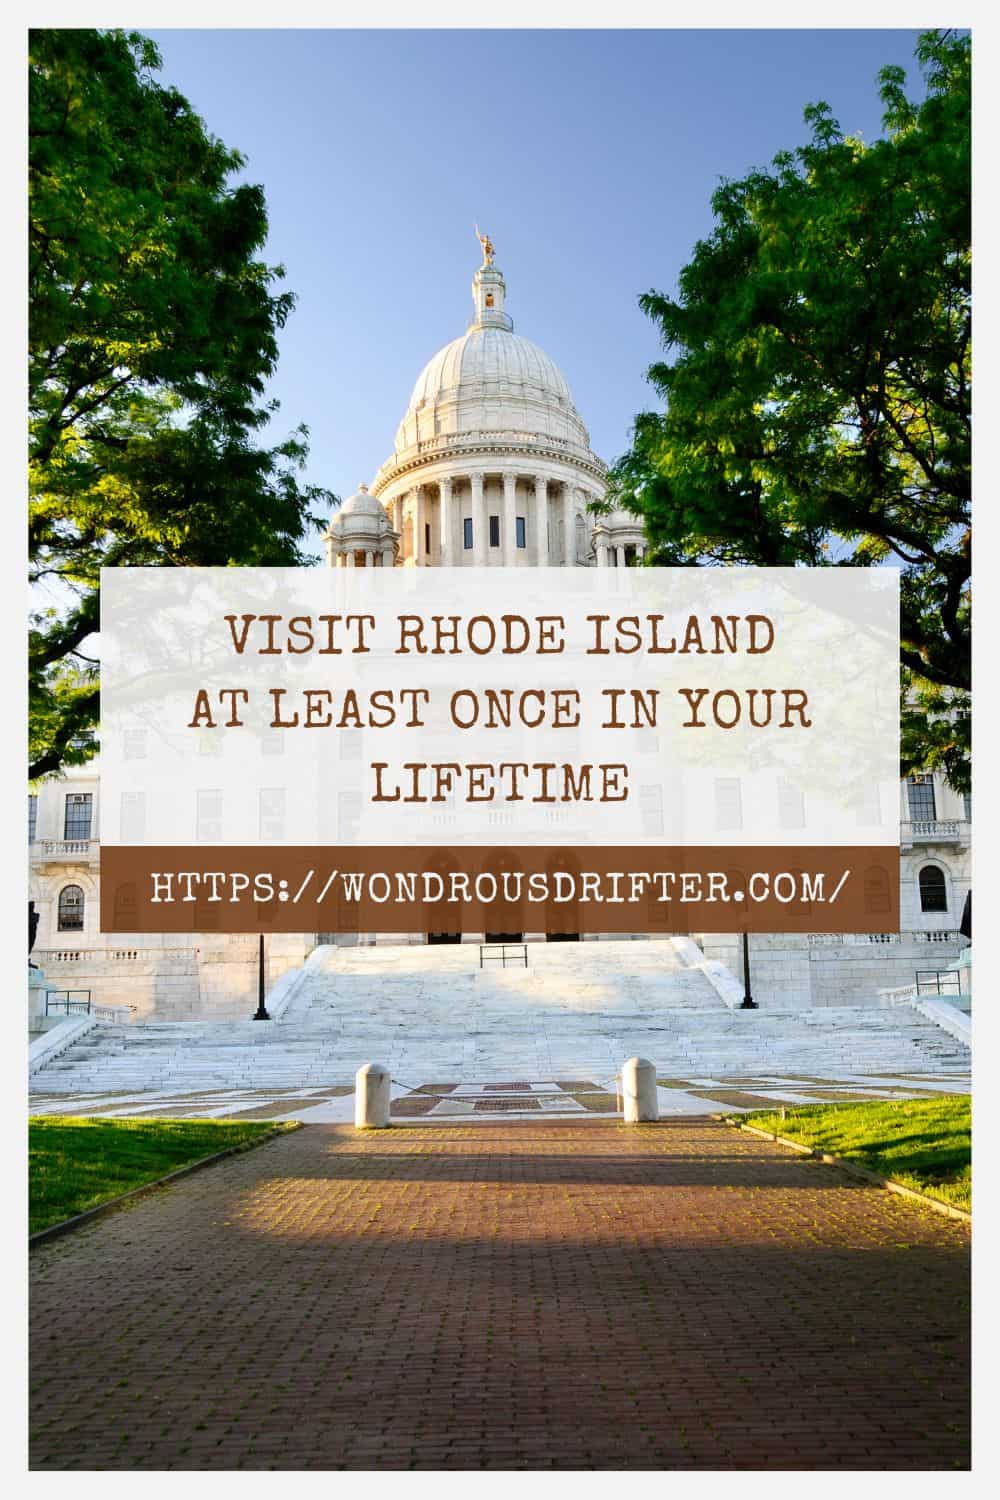 Visit Rhode Island at least once in your lifetime